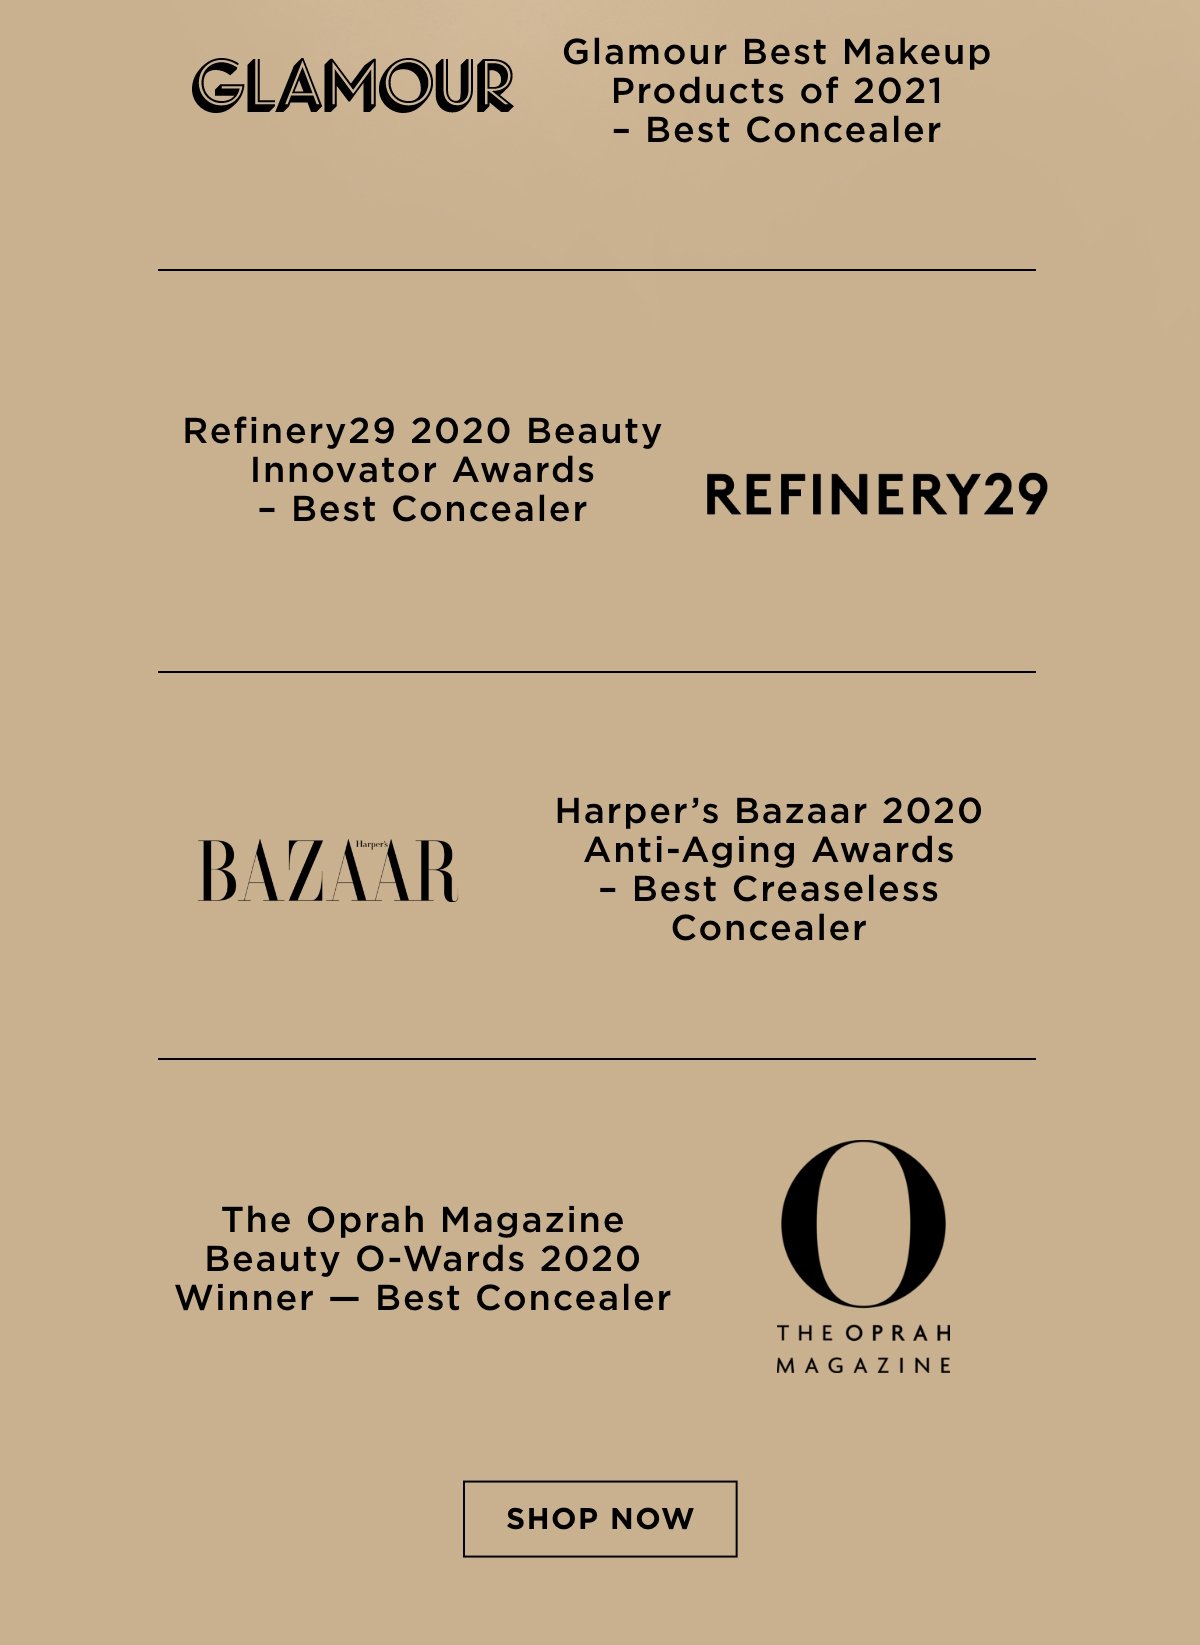 Awards From Glamour, Refinery29, Harper's Bazaar, and The Oprah Magazine